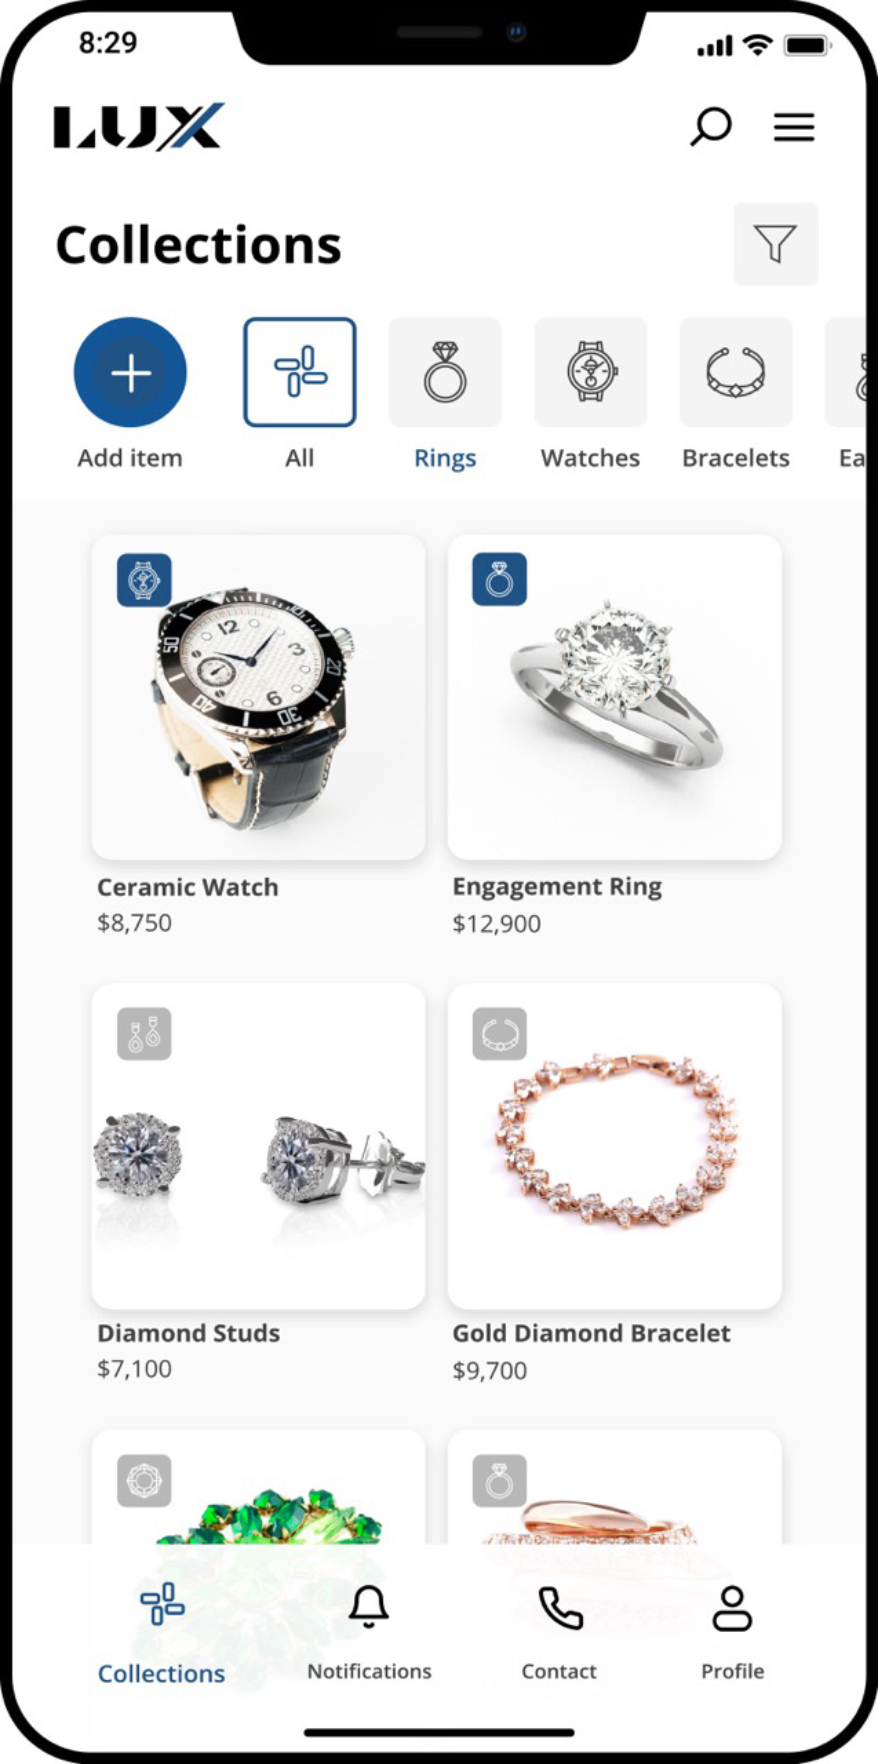 Meritage Jewelers Chooses Jewelers Mutual Insurtech Solution to Transform the Customer Experience